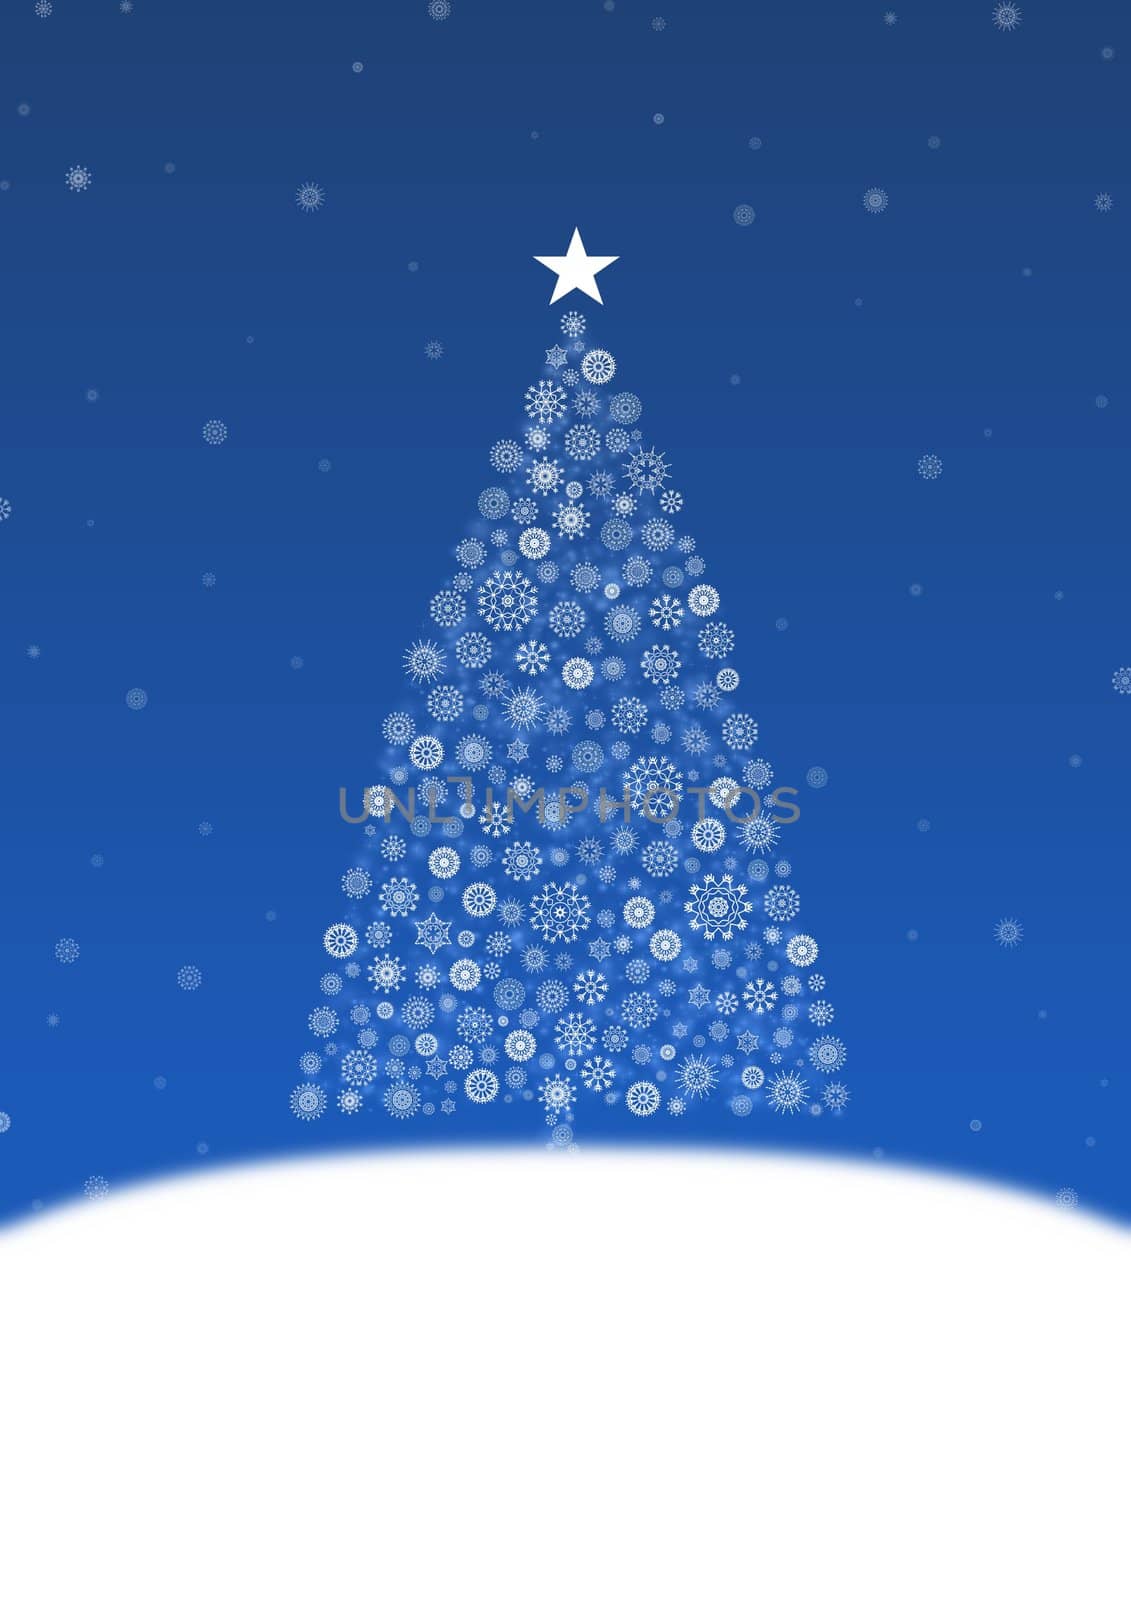 Illustration of a Christmas tree made from snowflakes